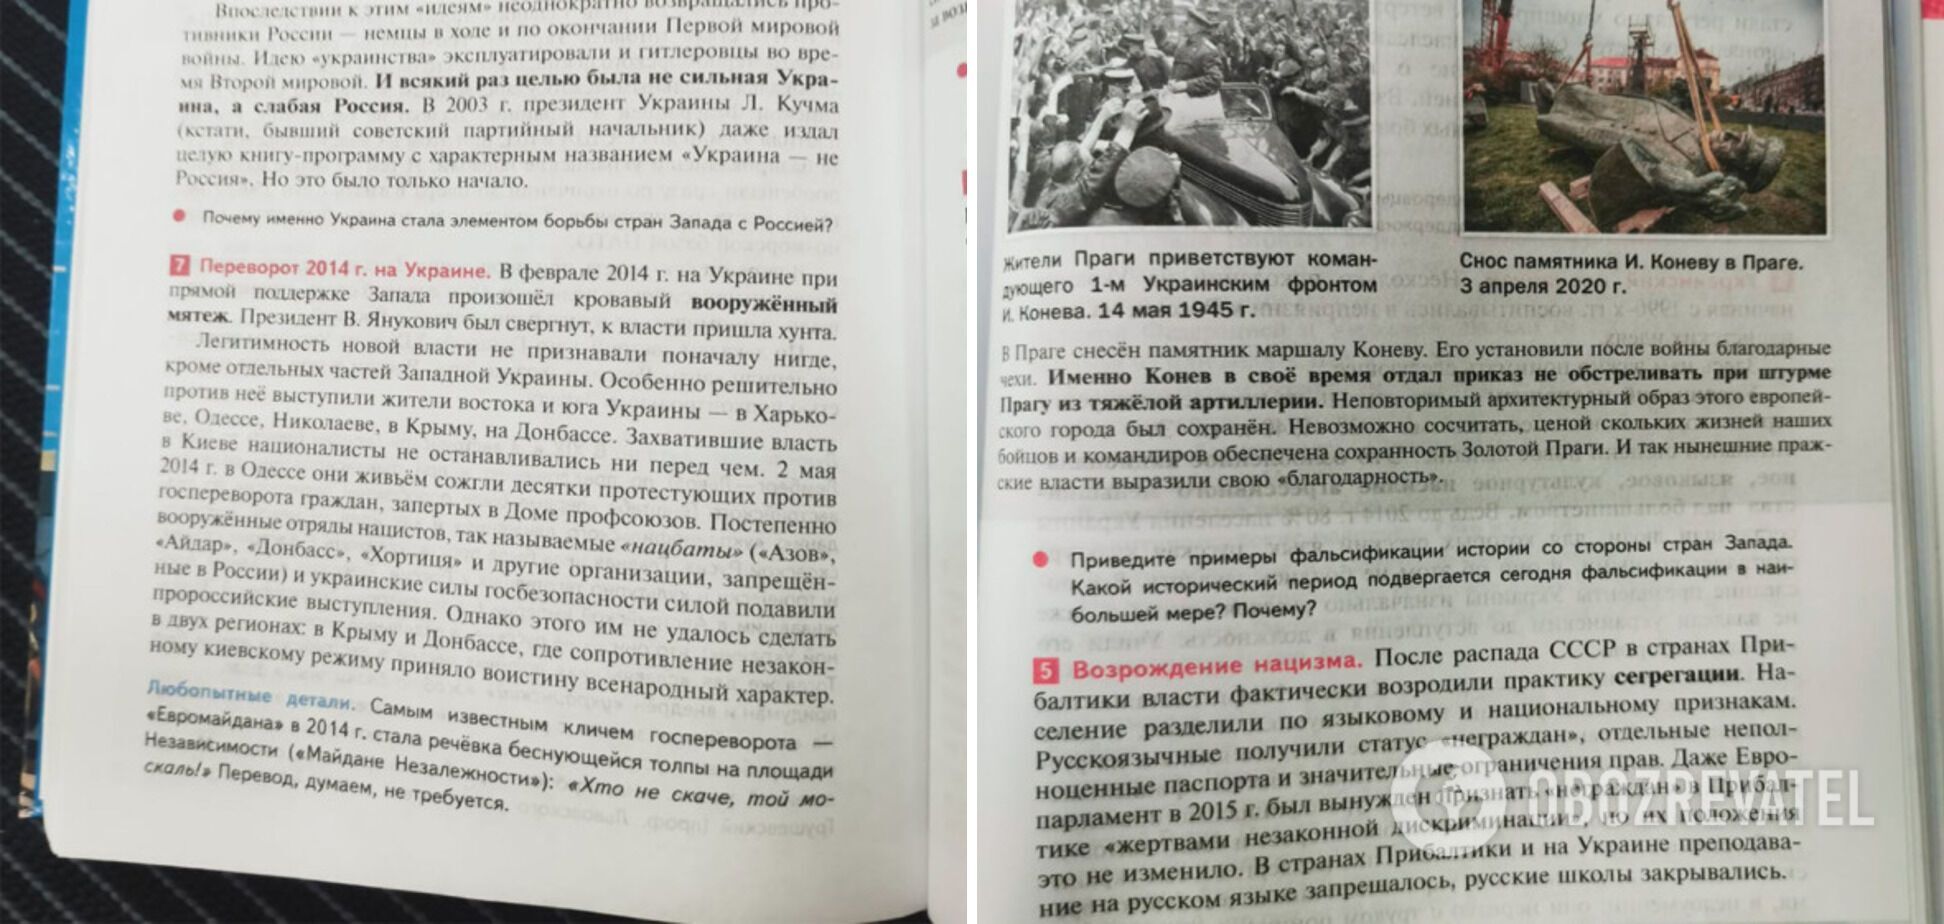 Russia has rewritten 50 years of history: new textbooks devote many pages to Ukraine